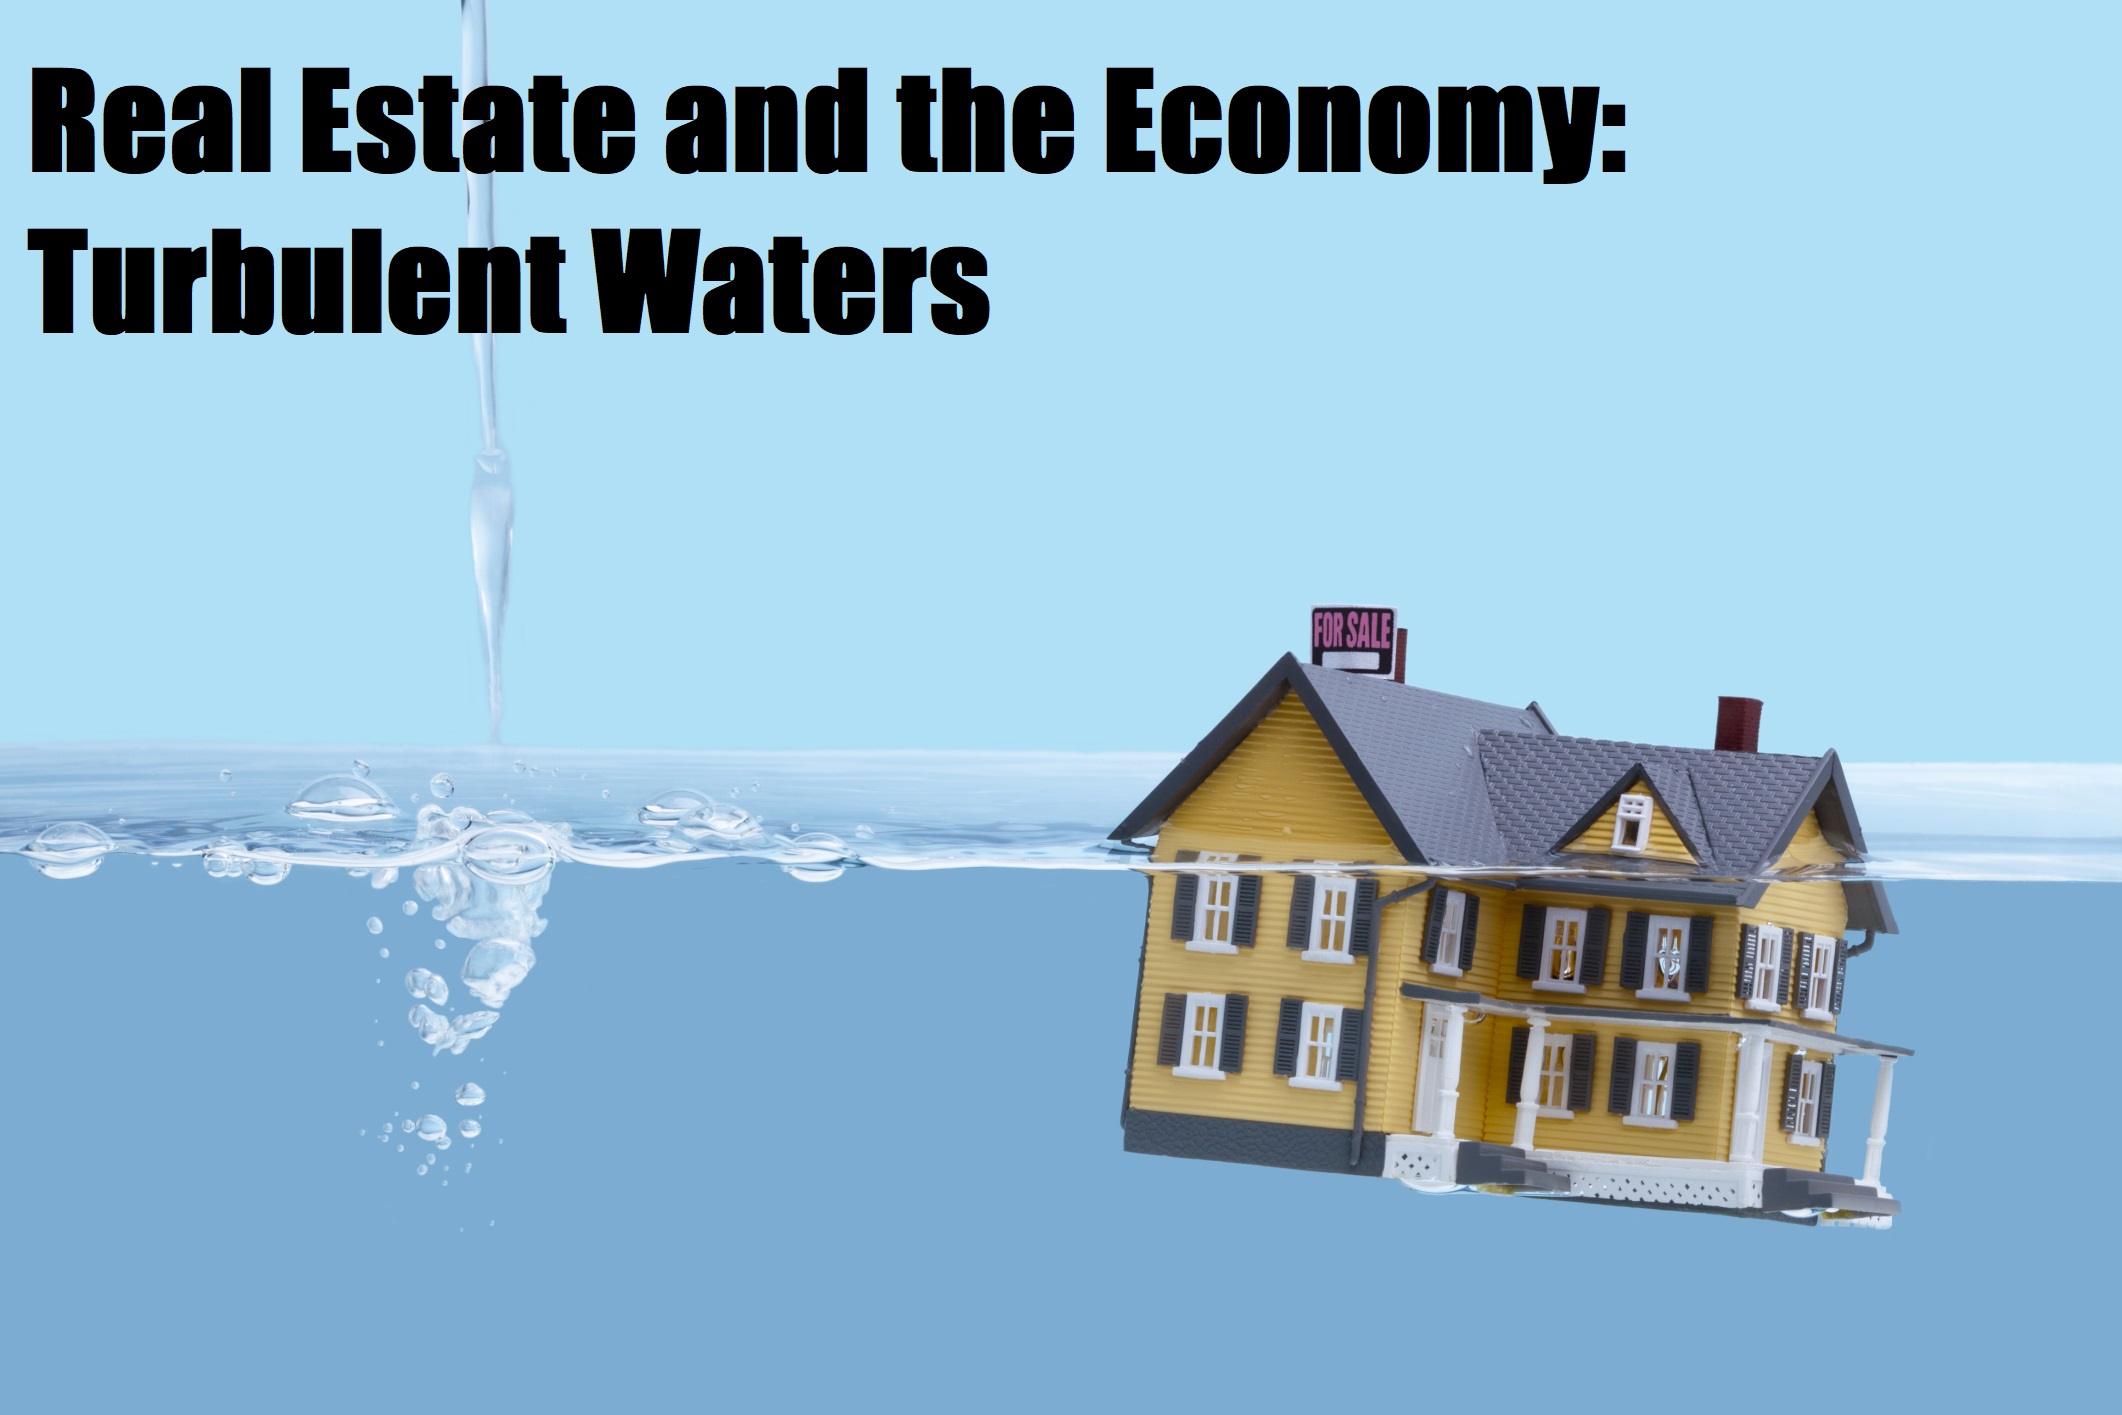 Real Estate & the Economy Turbulent Waters ahead